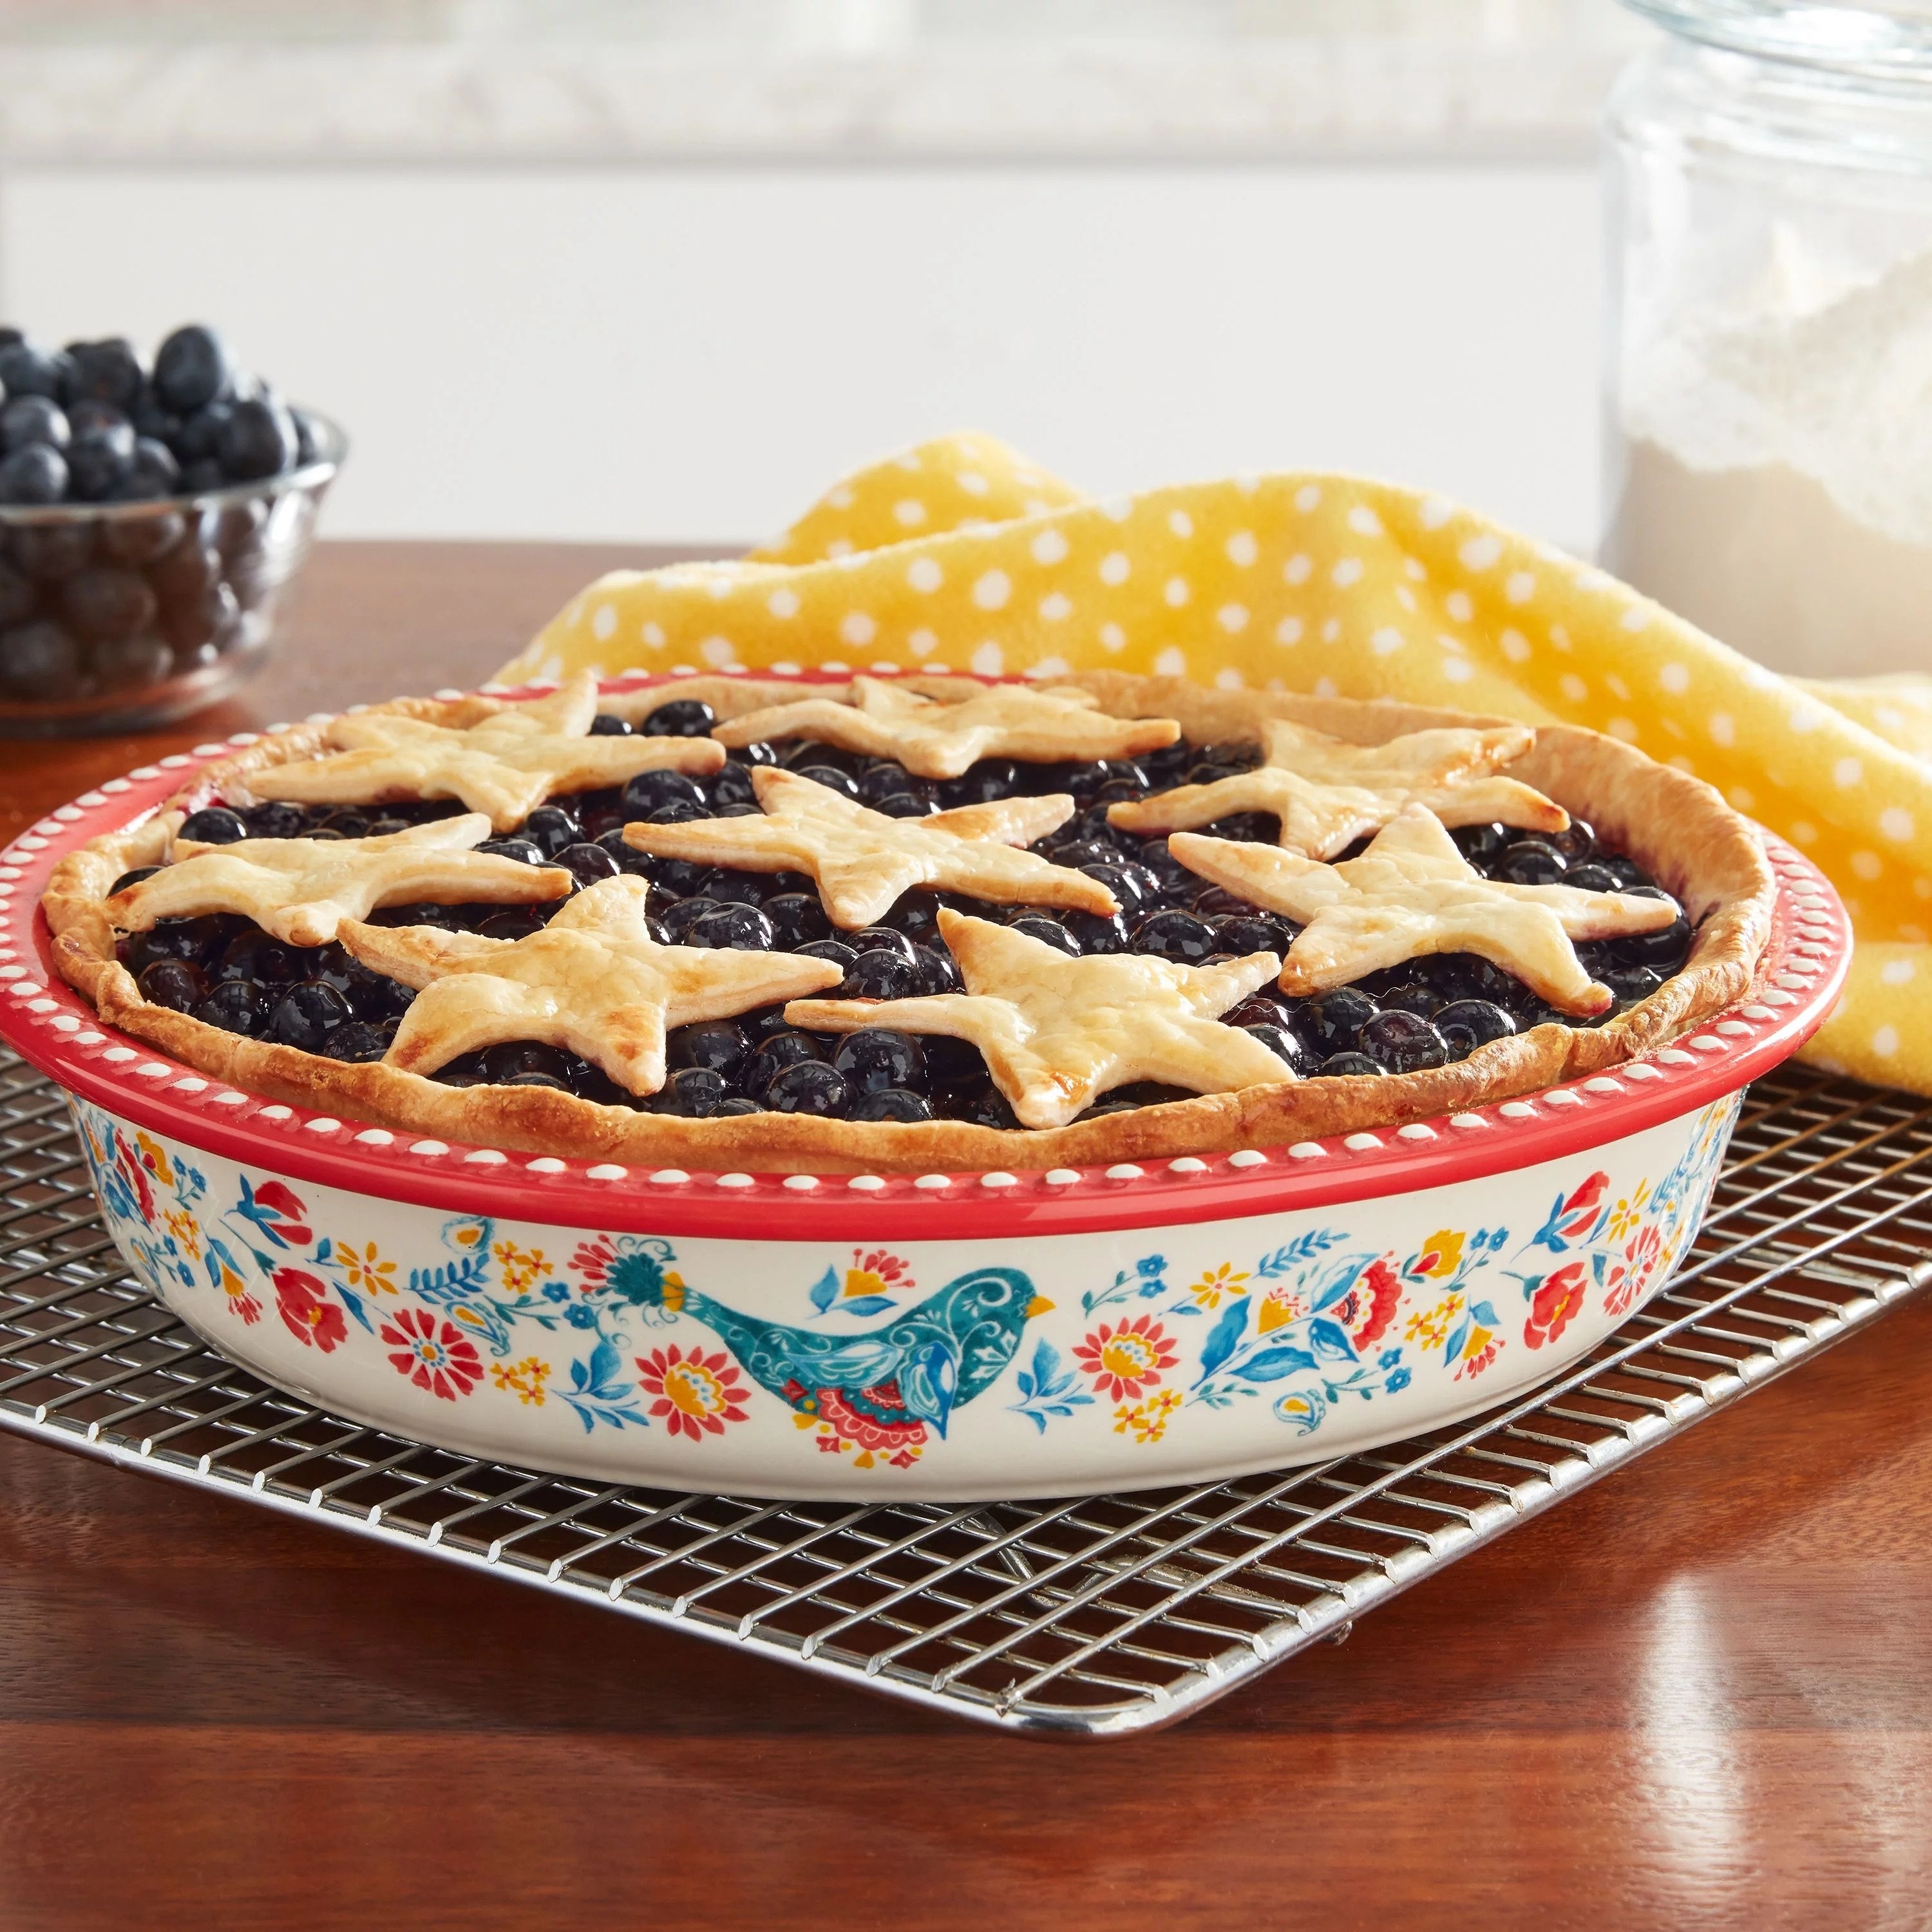 The red and white pie dish, featuring a floral and blue bird design